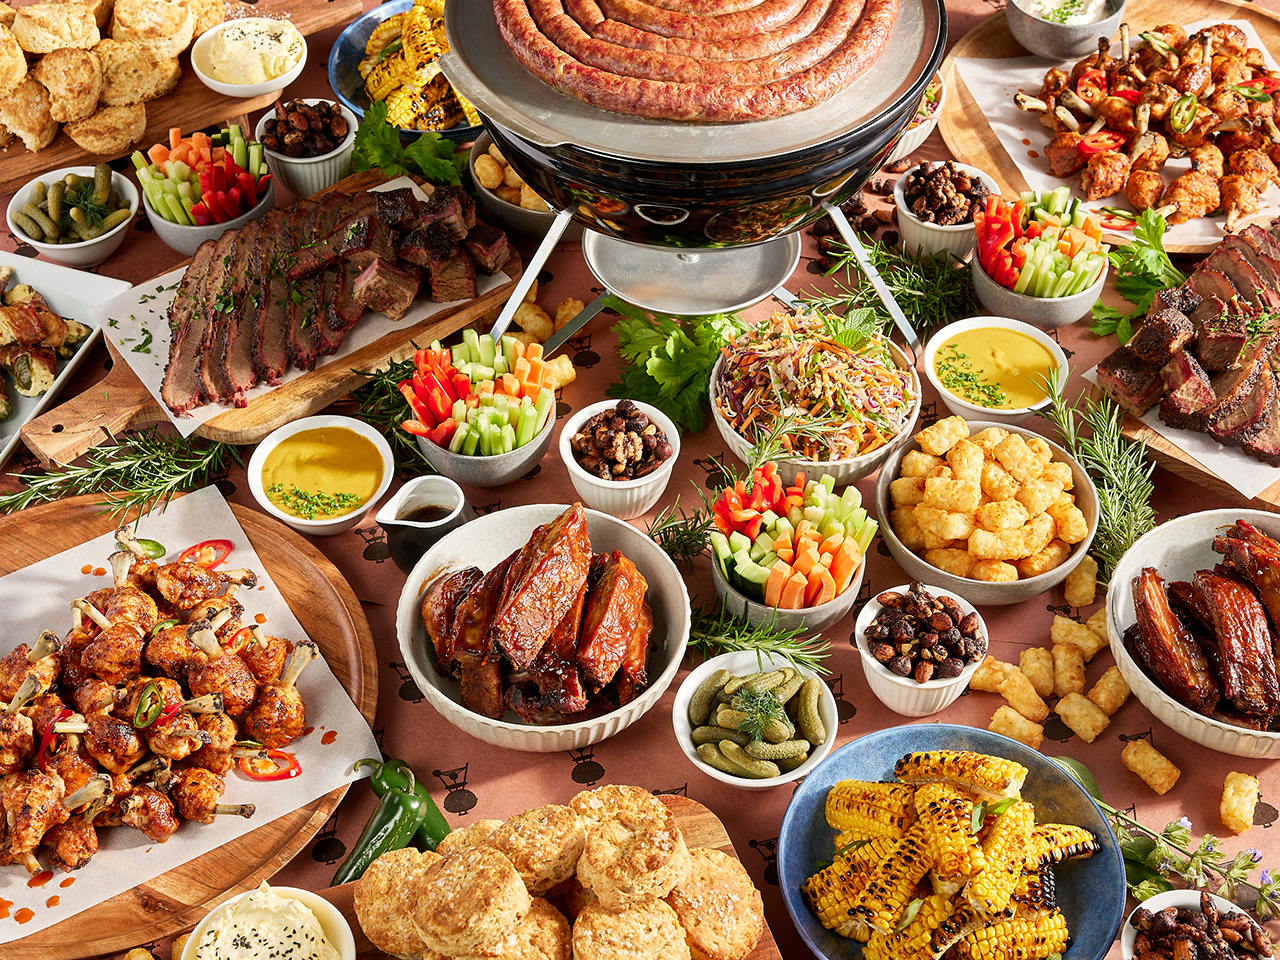  The Ultimate Barbecue Grazing Table

